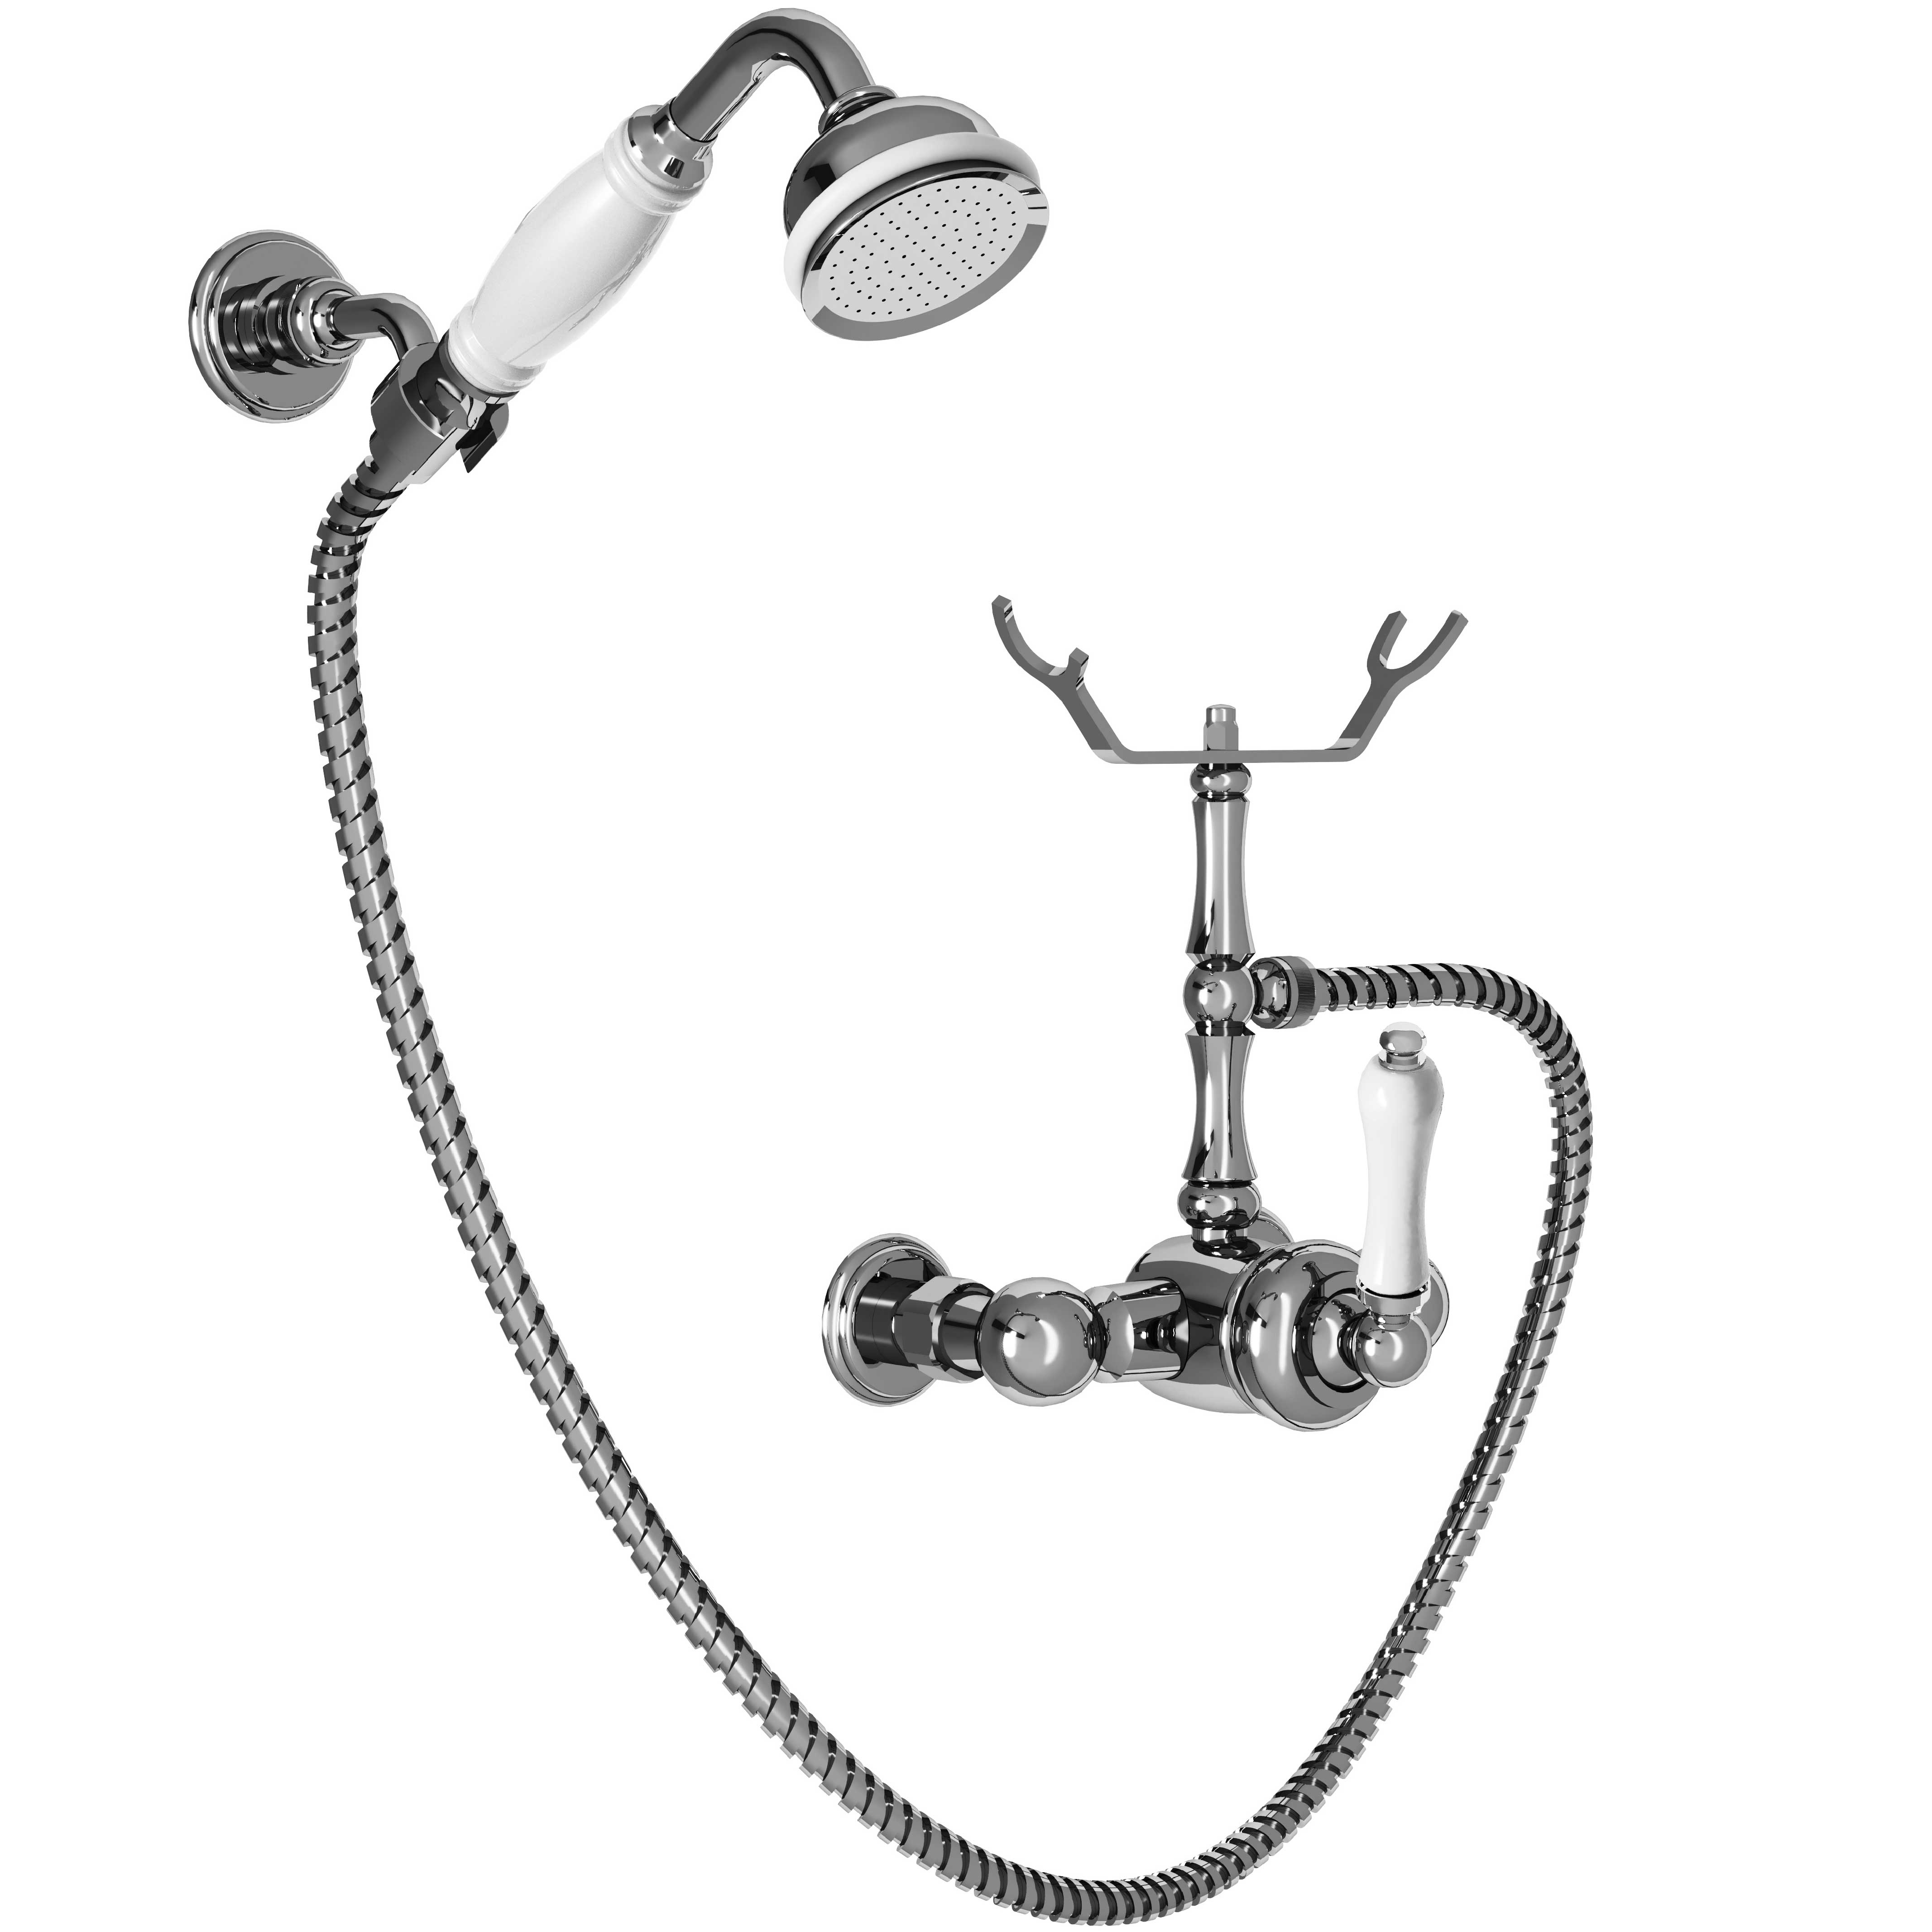 M04-2201M Single-lever shower mixer with hook